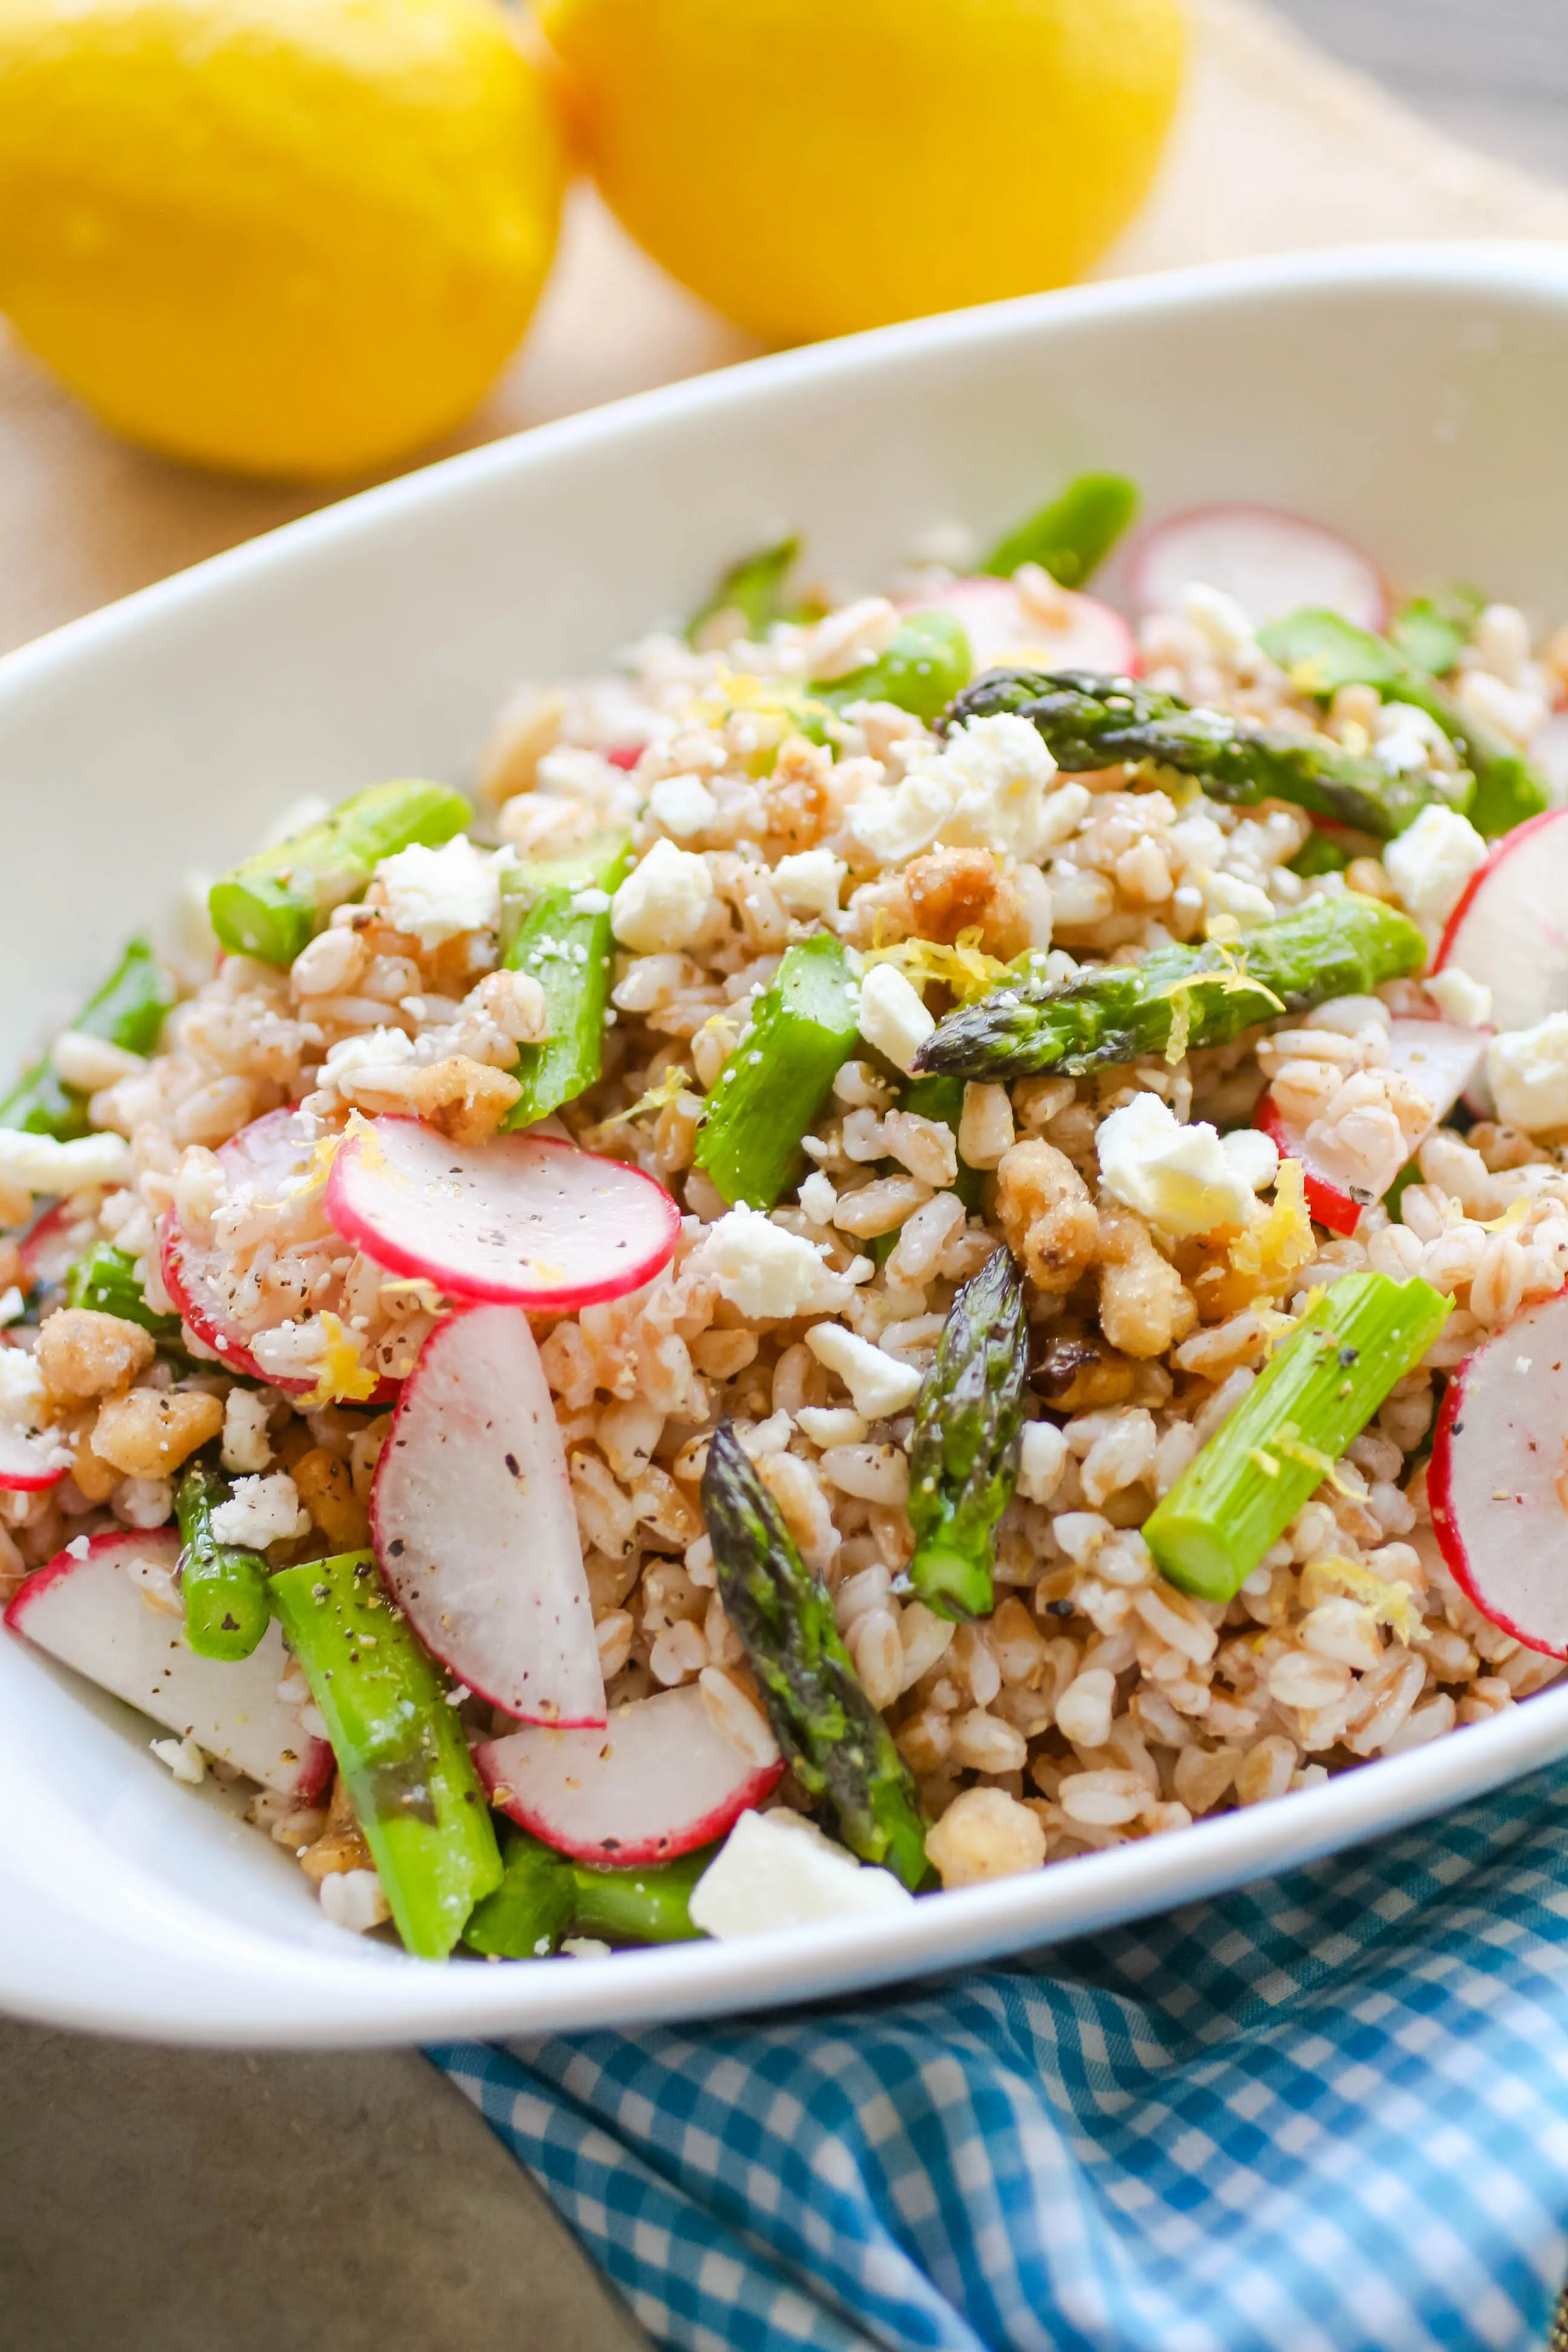 Farro Salad with Asparagus, Radishes & Lemon Vinaigrette is the perfect side as a salad this season. Farro Salad with Asparagus, Radishes & Lemon Vinaigrette is a lovely and hearty salad.